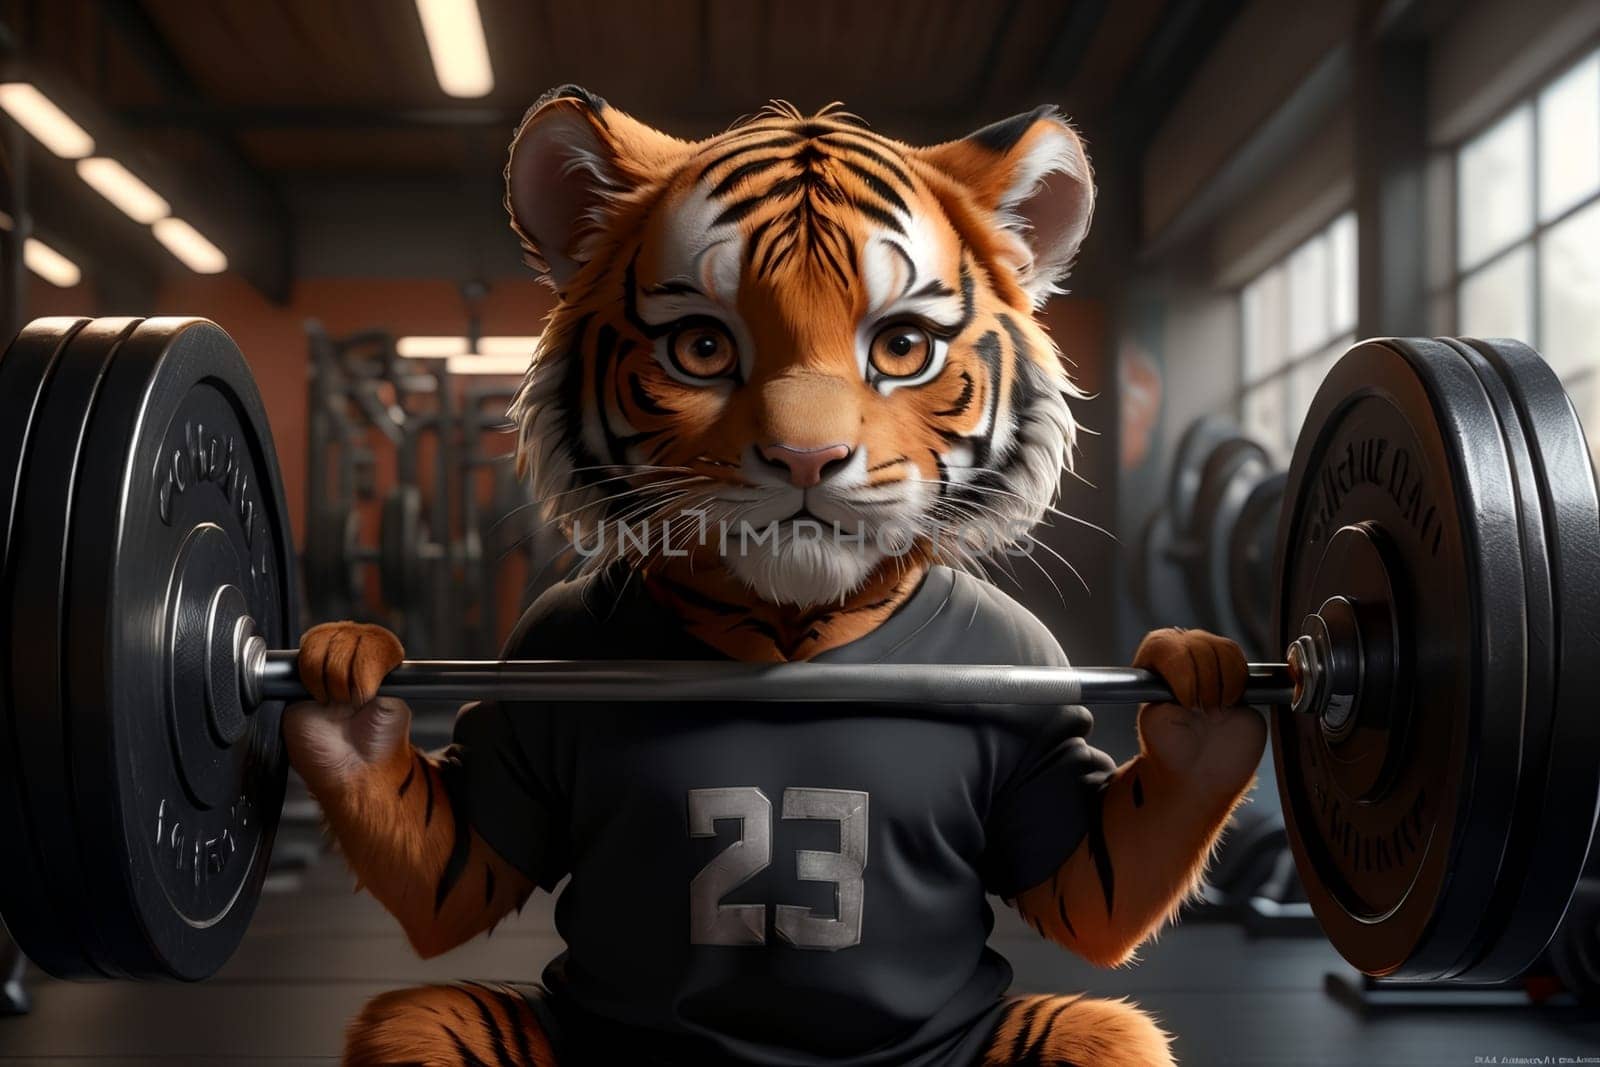 tiger goes in for sports in the gym, lifts a heavy barbell by Rawlik